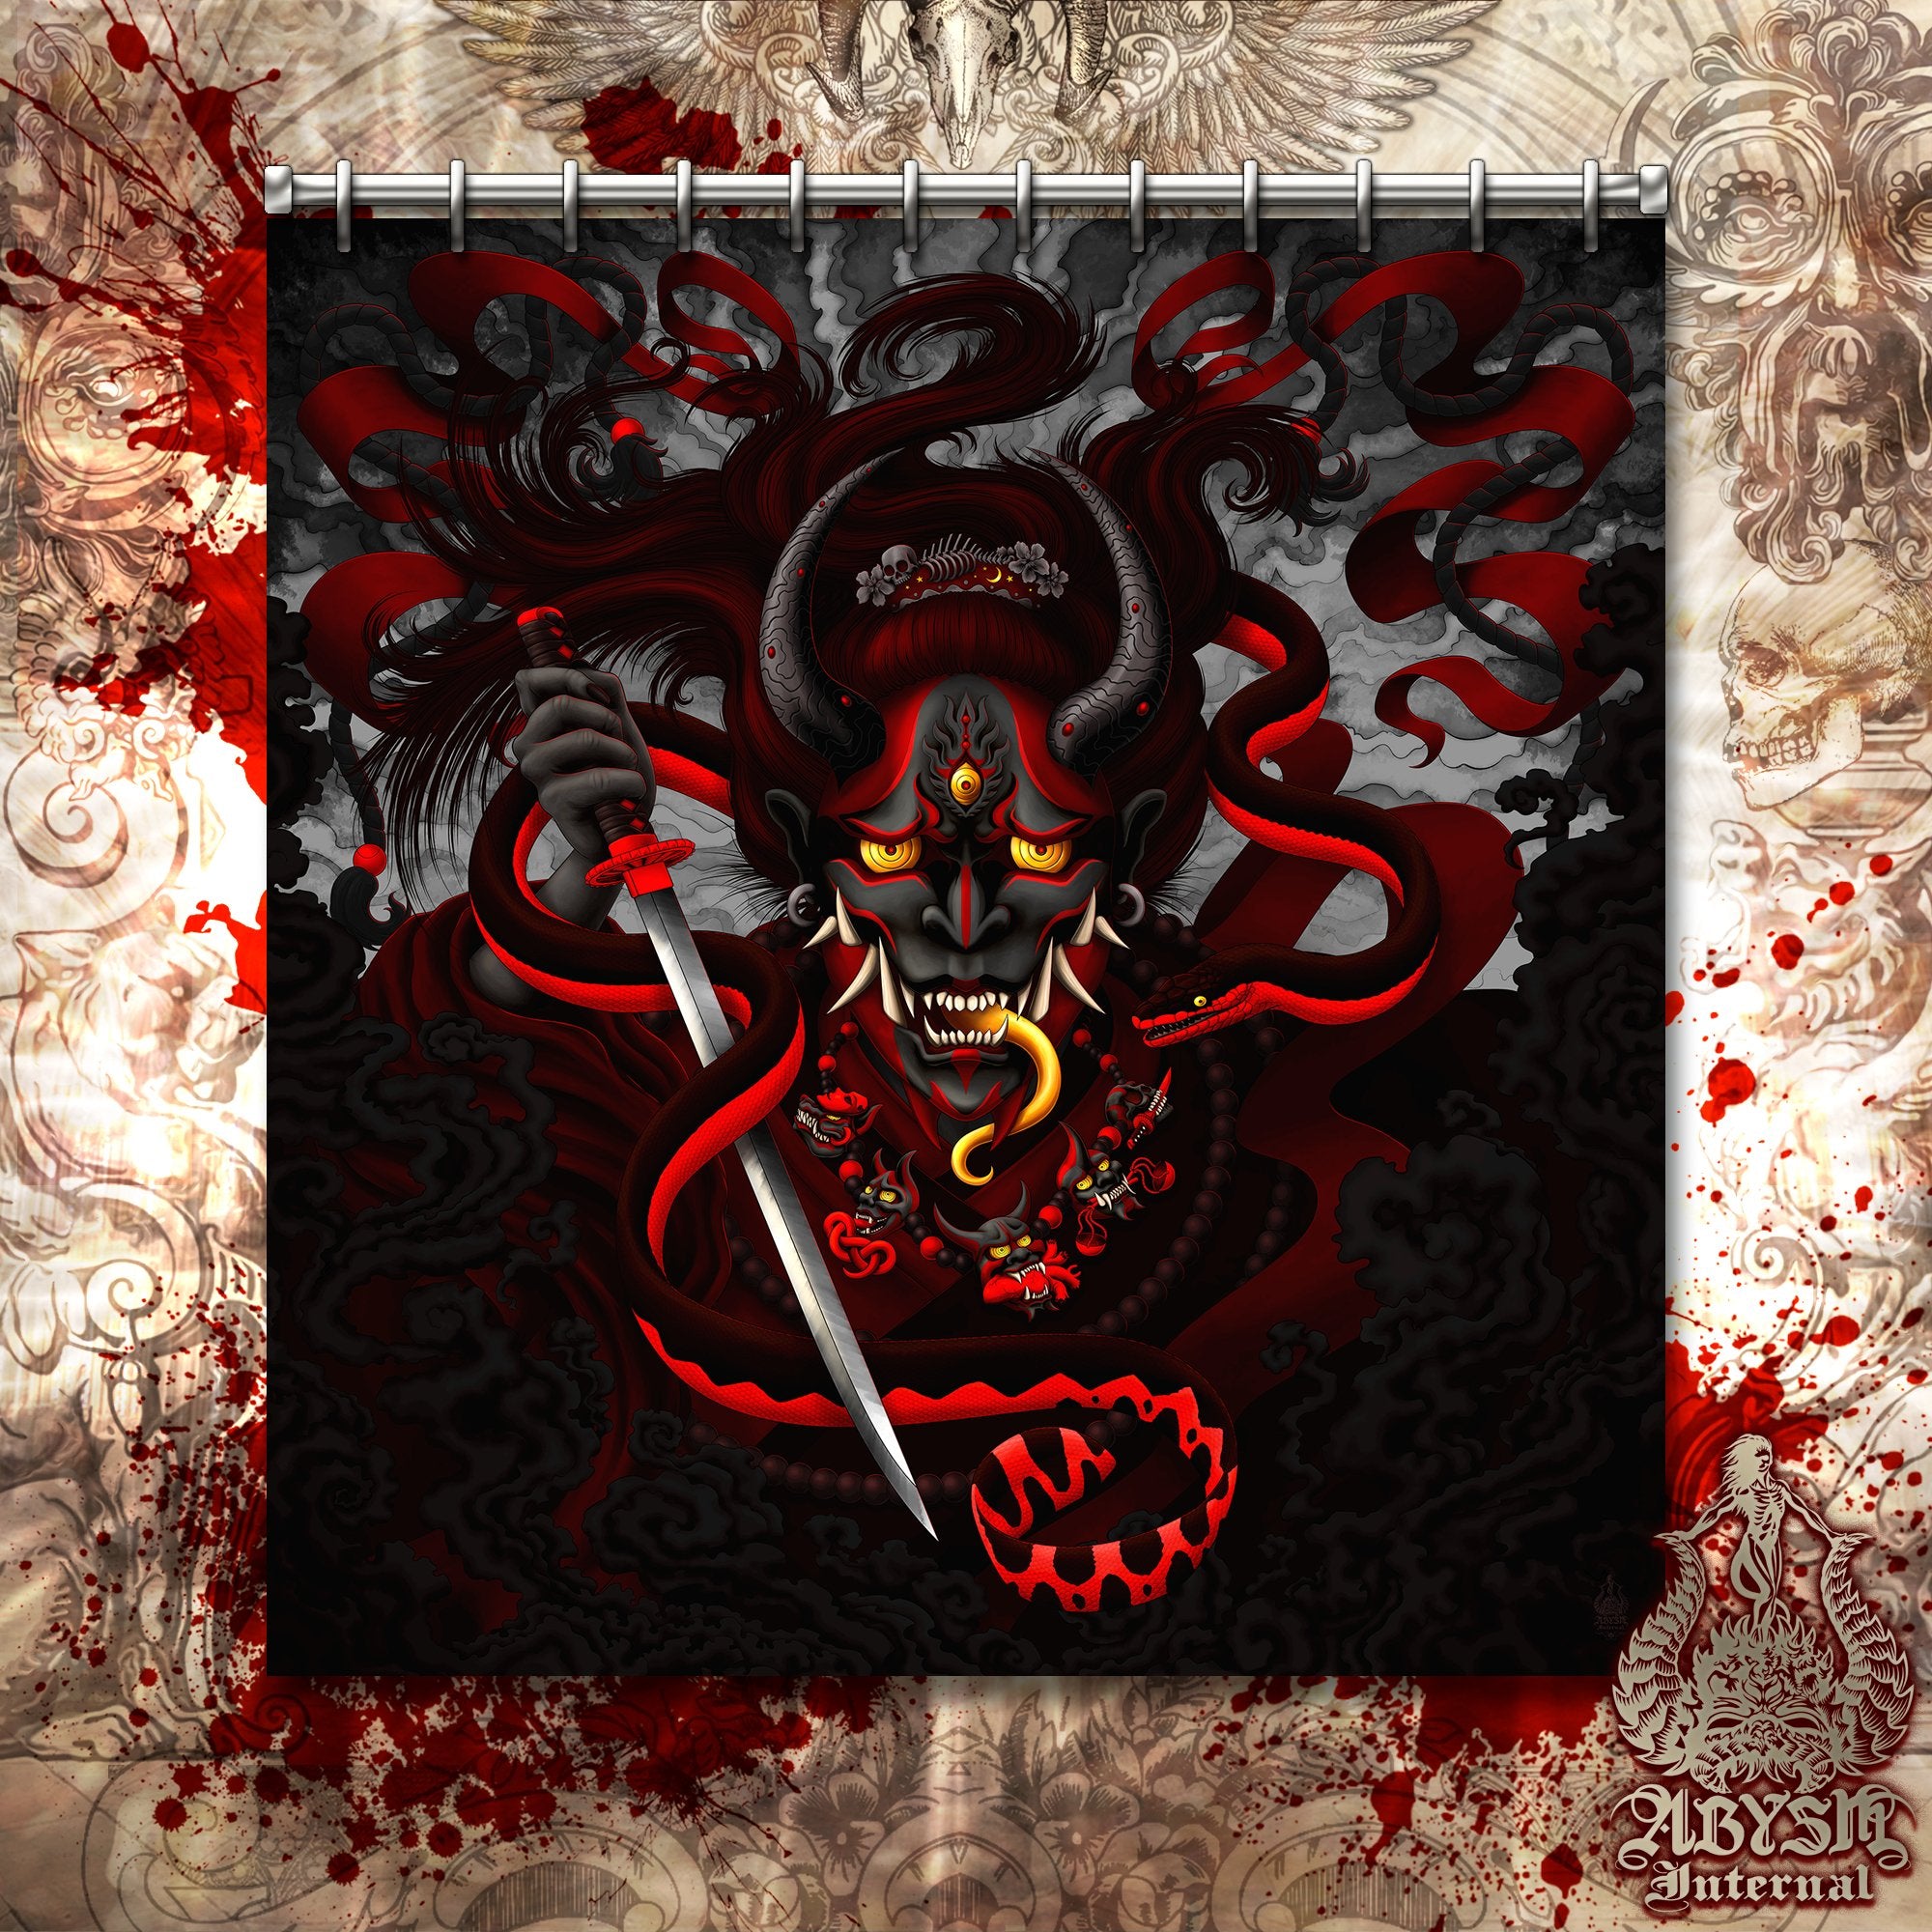 Gothic Demon Shower Curtain, 71x74 inches, Japanese Anime Bathroom Decor - Hannya and Snake, Red Black - Abysm Internal